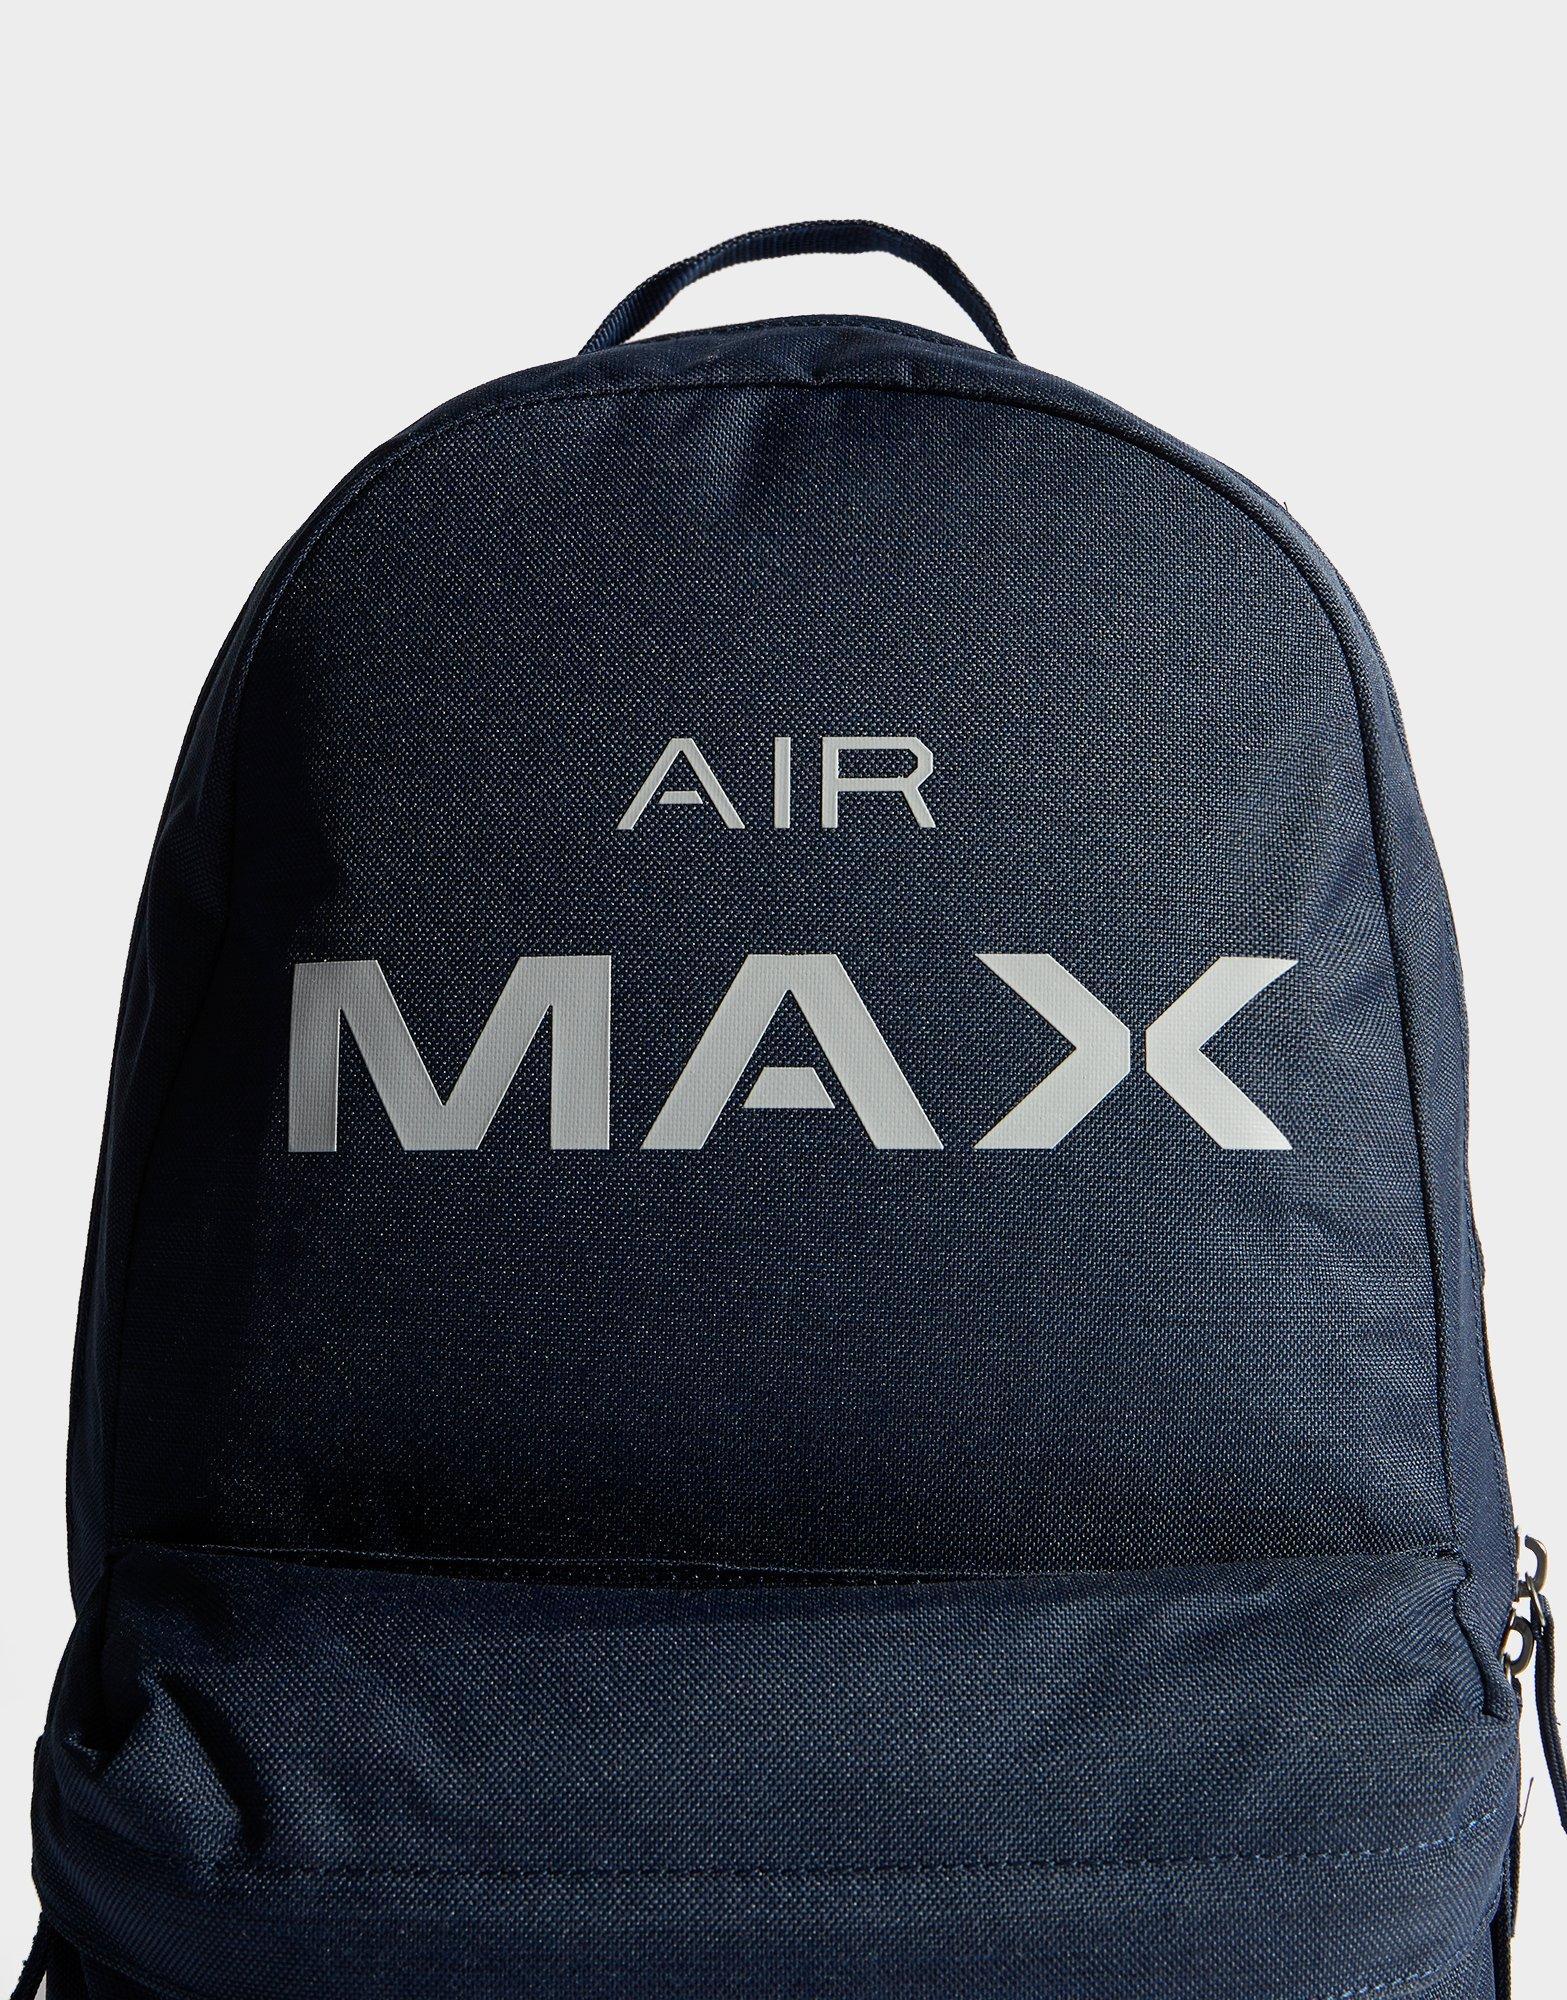 Nike Synthetic Air Max Backpack in Navy 